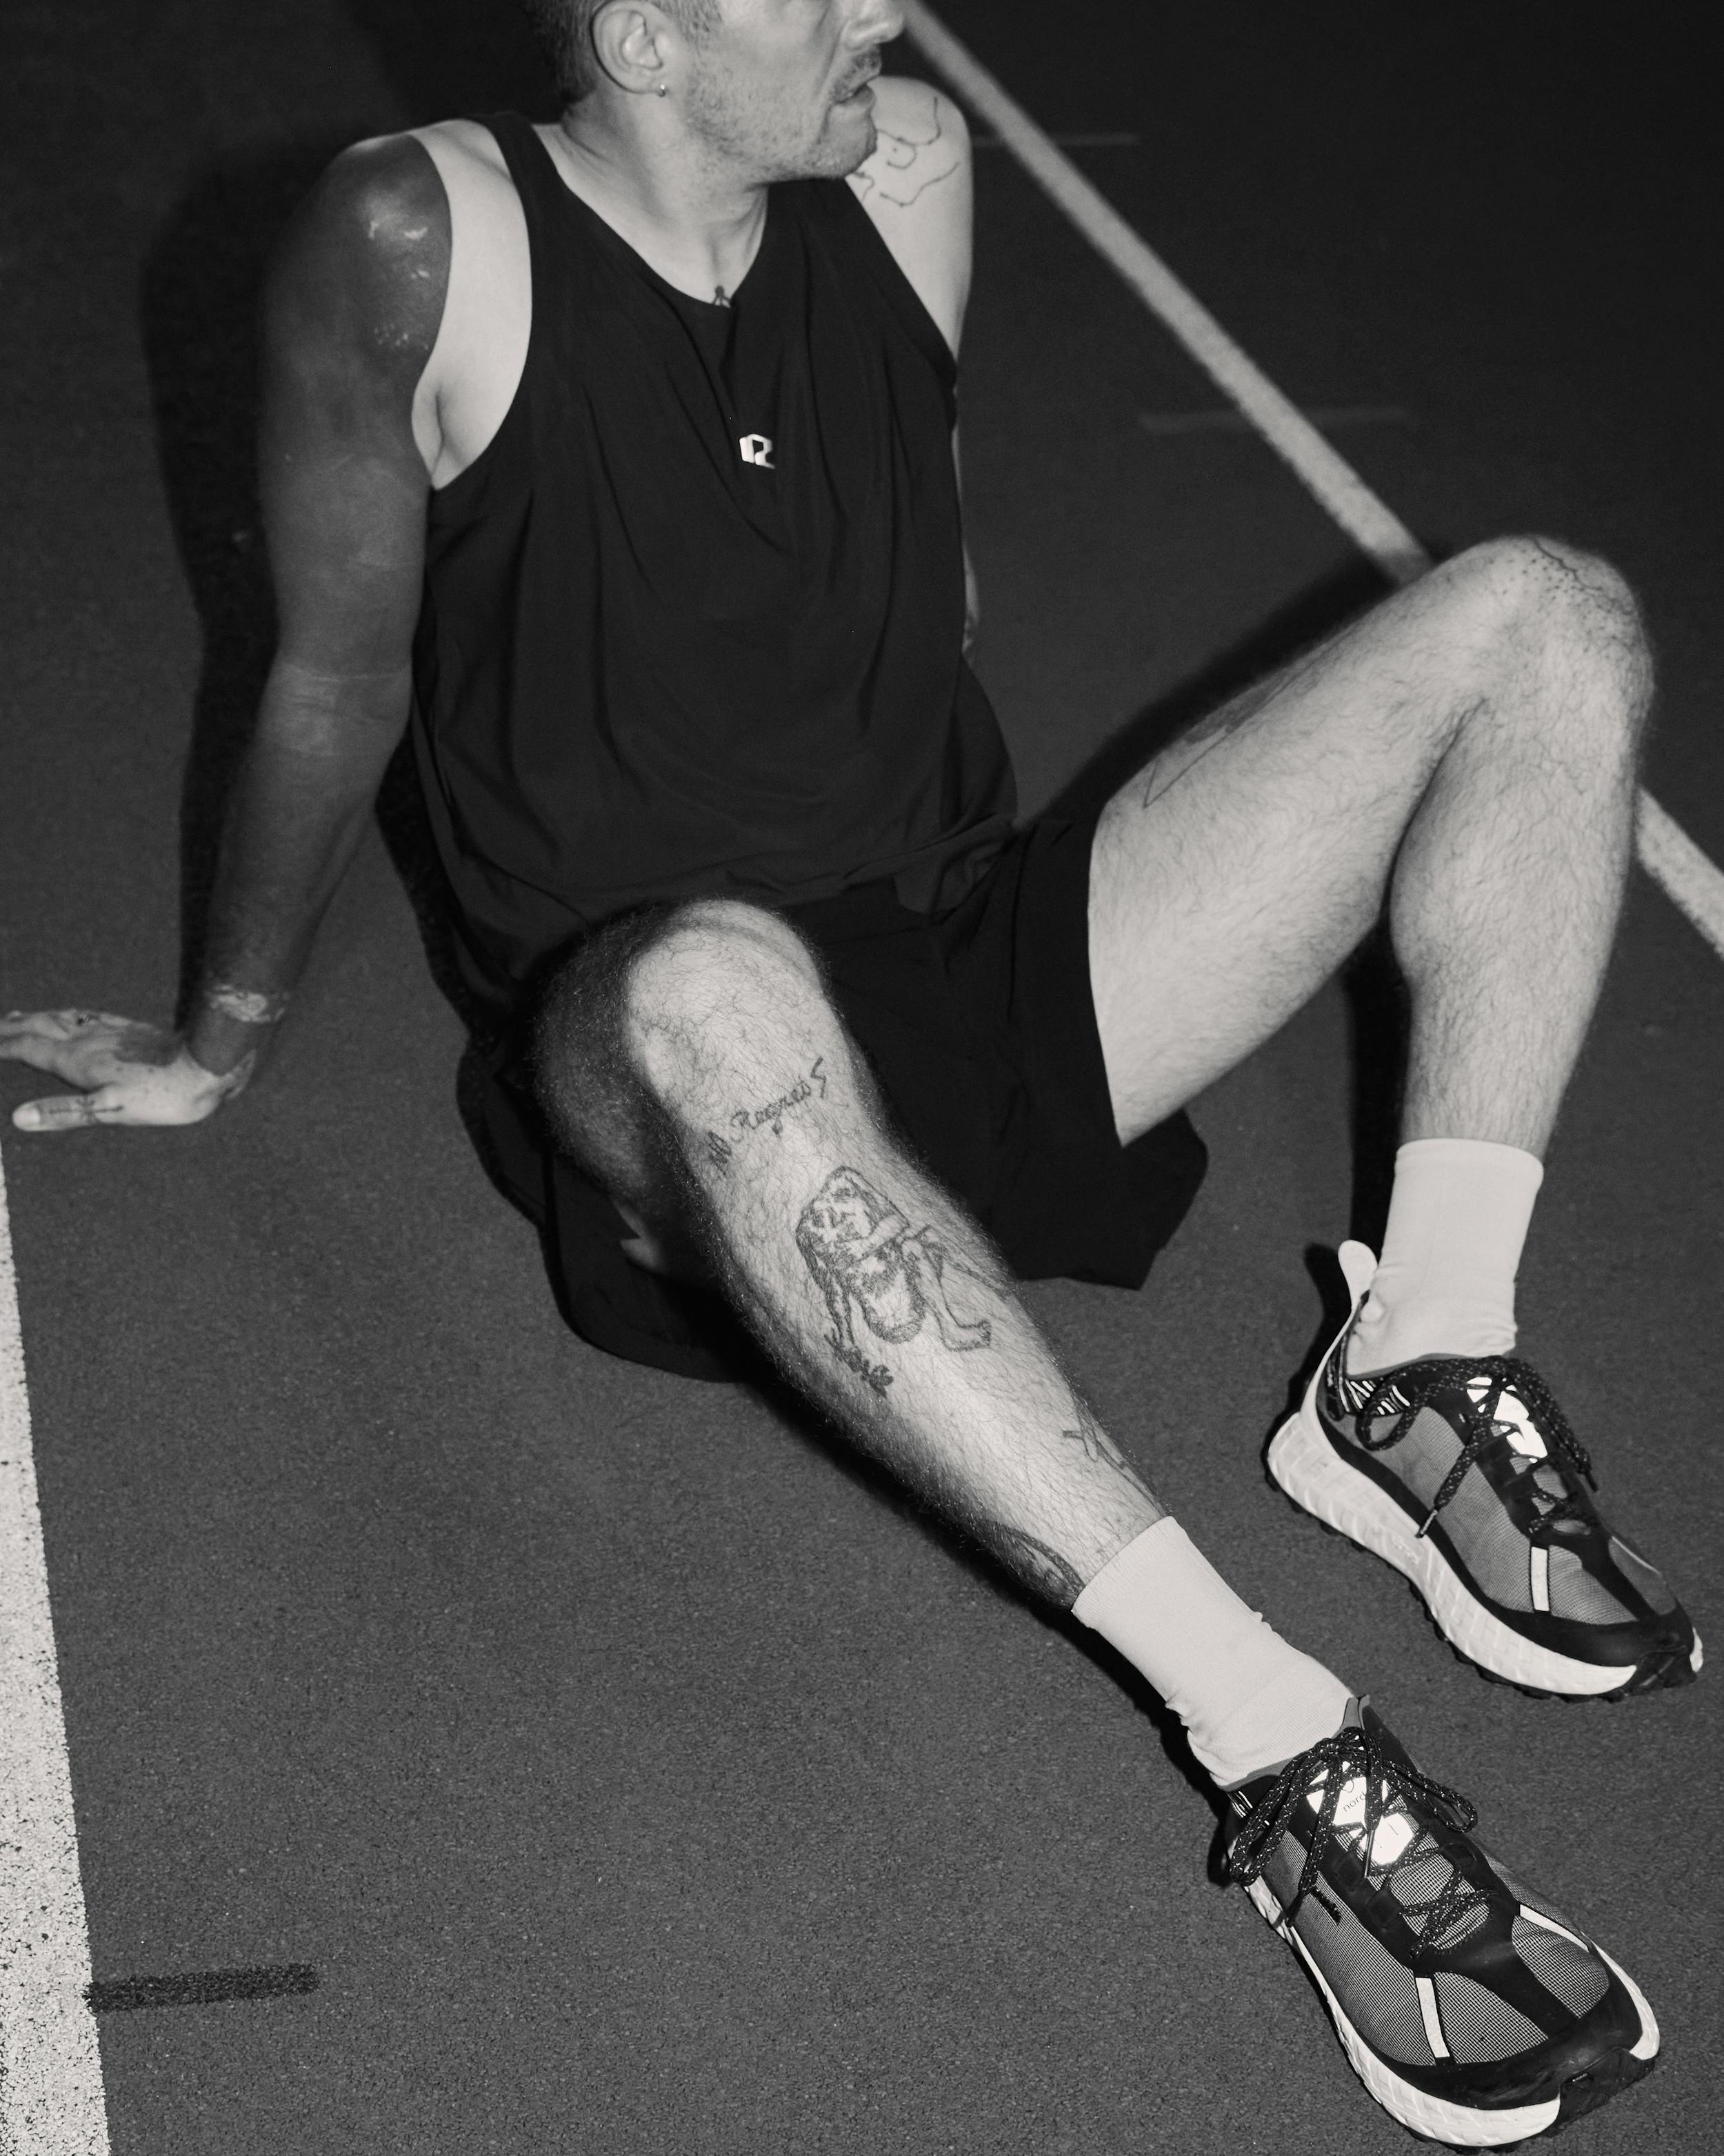 BERLIN NIGHT RUN - DENNIS RUNS IN THE ERIS TANK - COLLECTION 02 - Photographed by Jack Hare